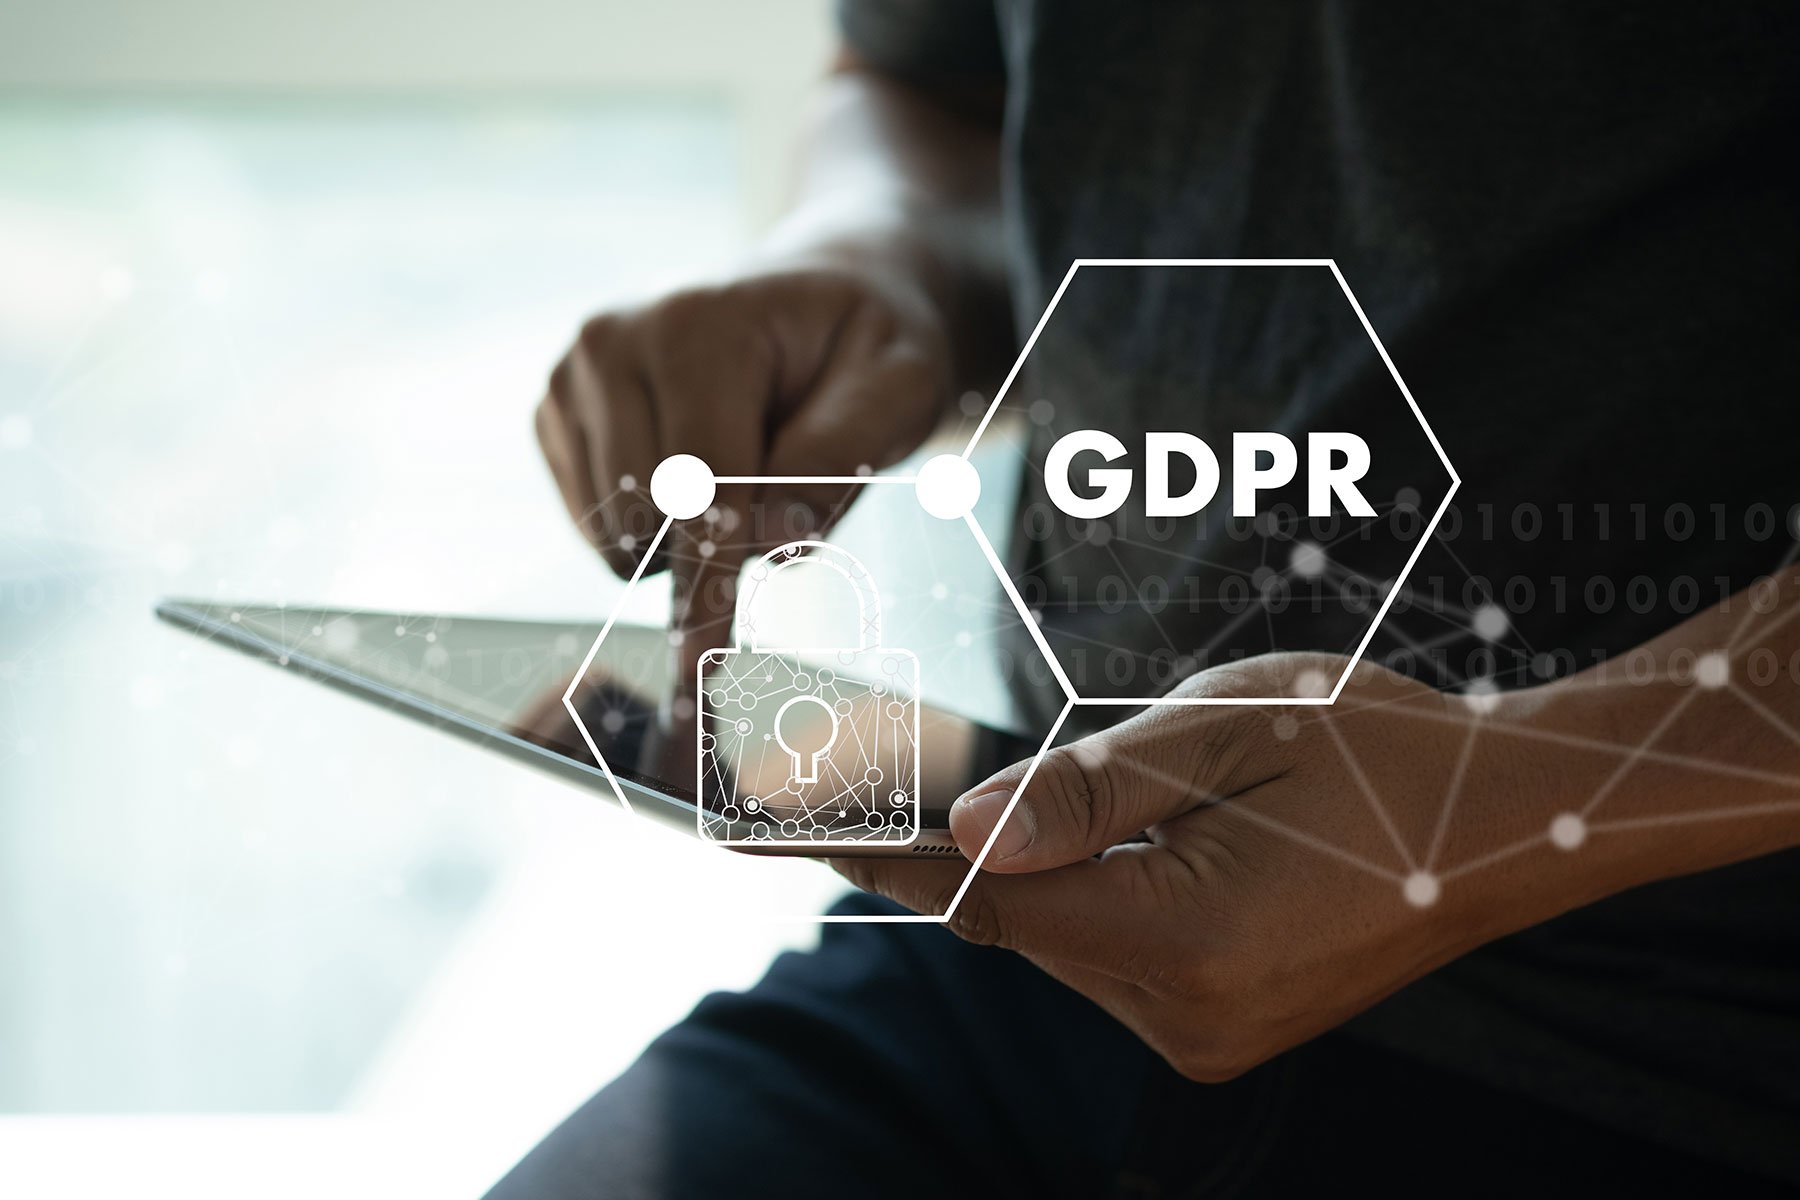 SwipedOn: Your responsibilities as a business GDPR and COVID-19